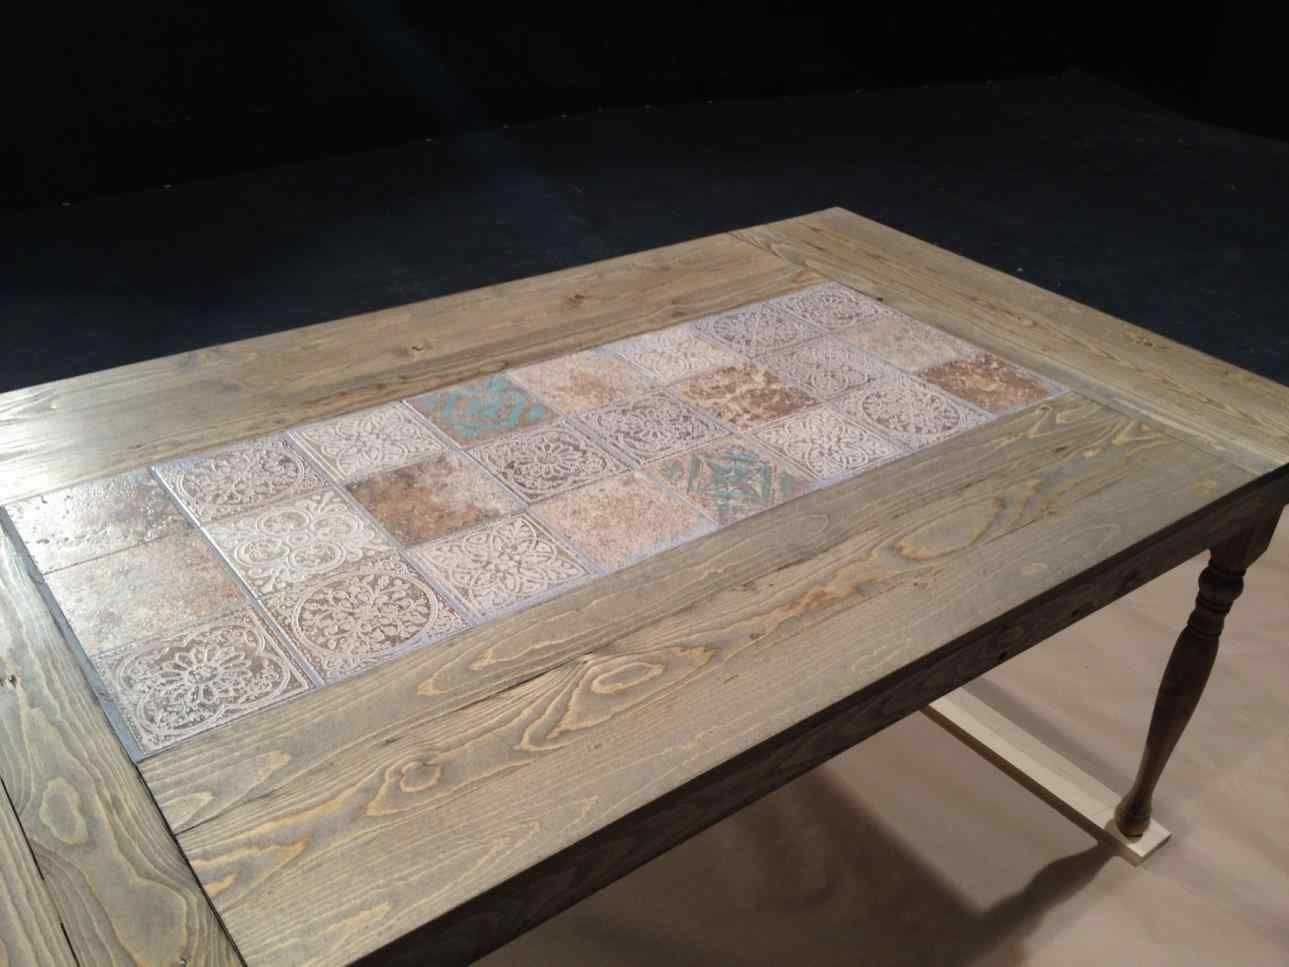 Gorgeous Diy Tile Coffee Table Design For Easy Build Tiled throughout proportions 1289 X 967